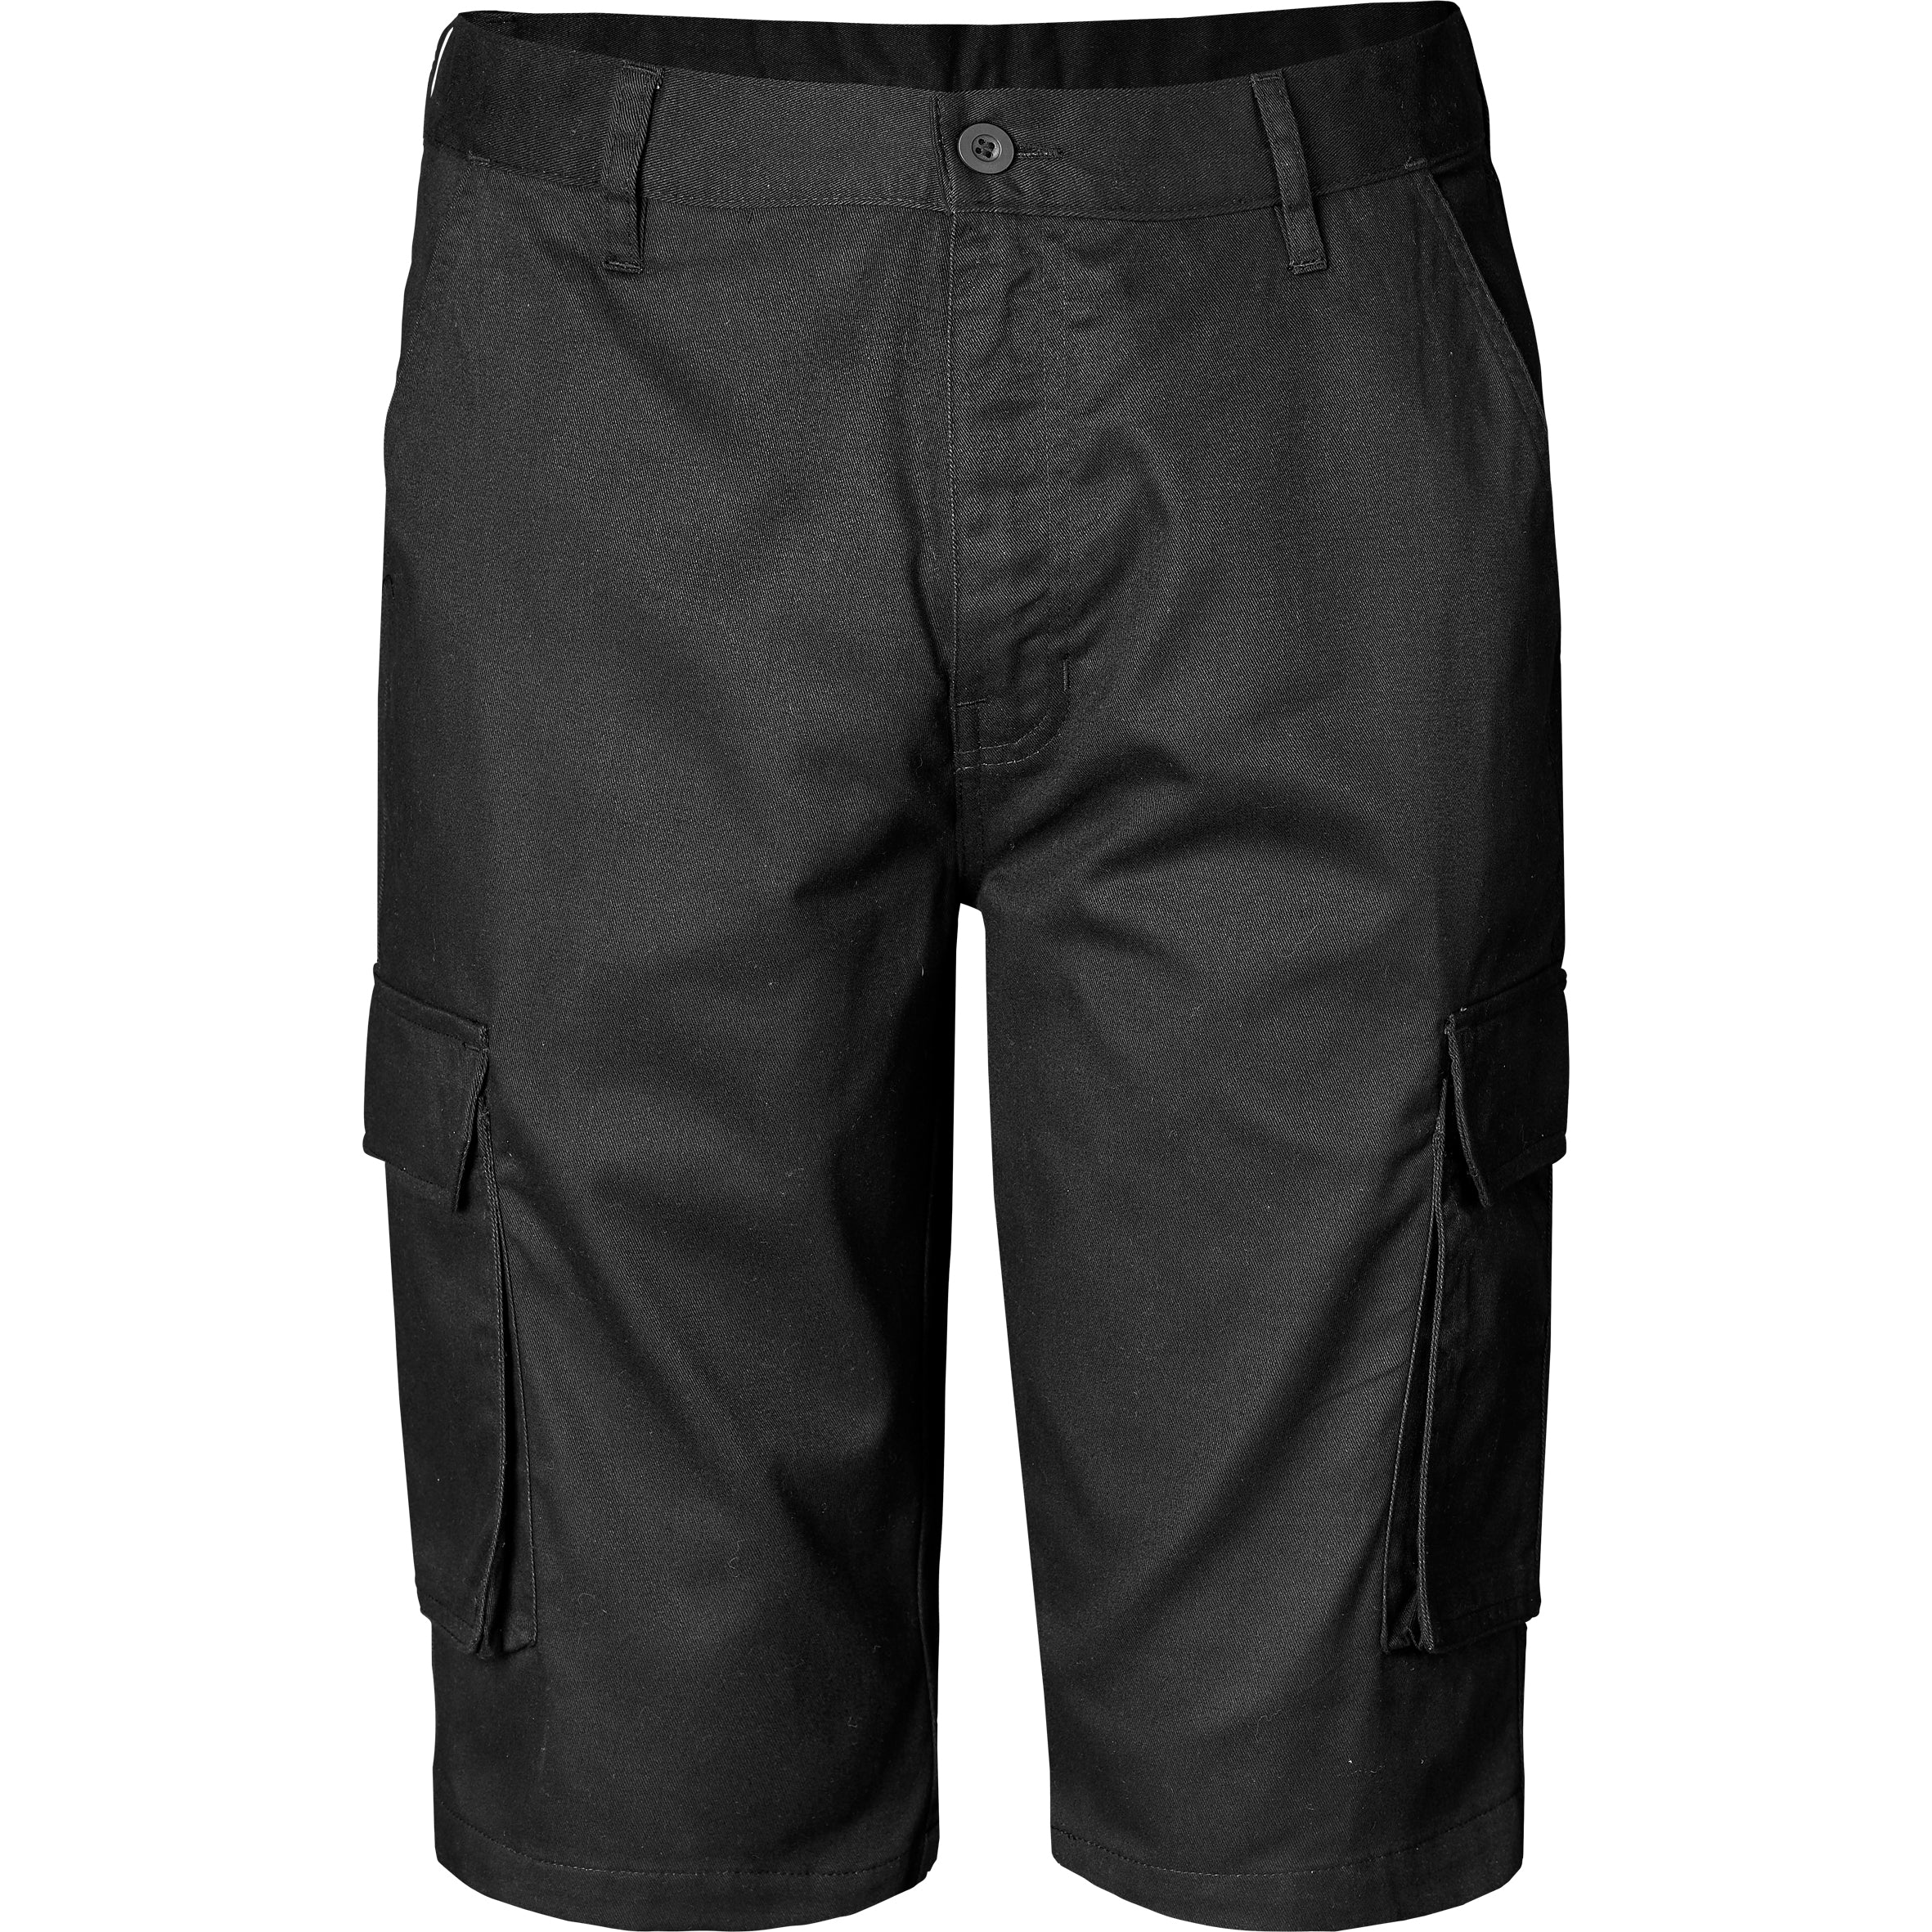 Other Clothing, Shoes & Accessories - Mens Highlands Cargo Pants ...